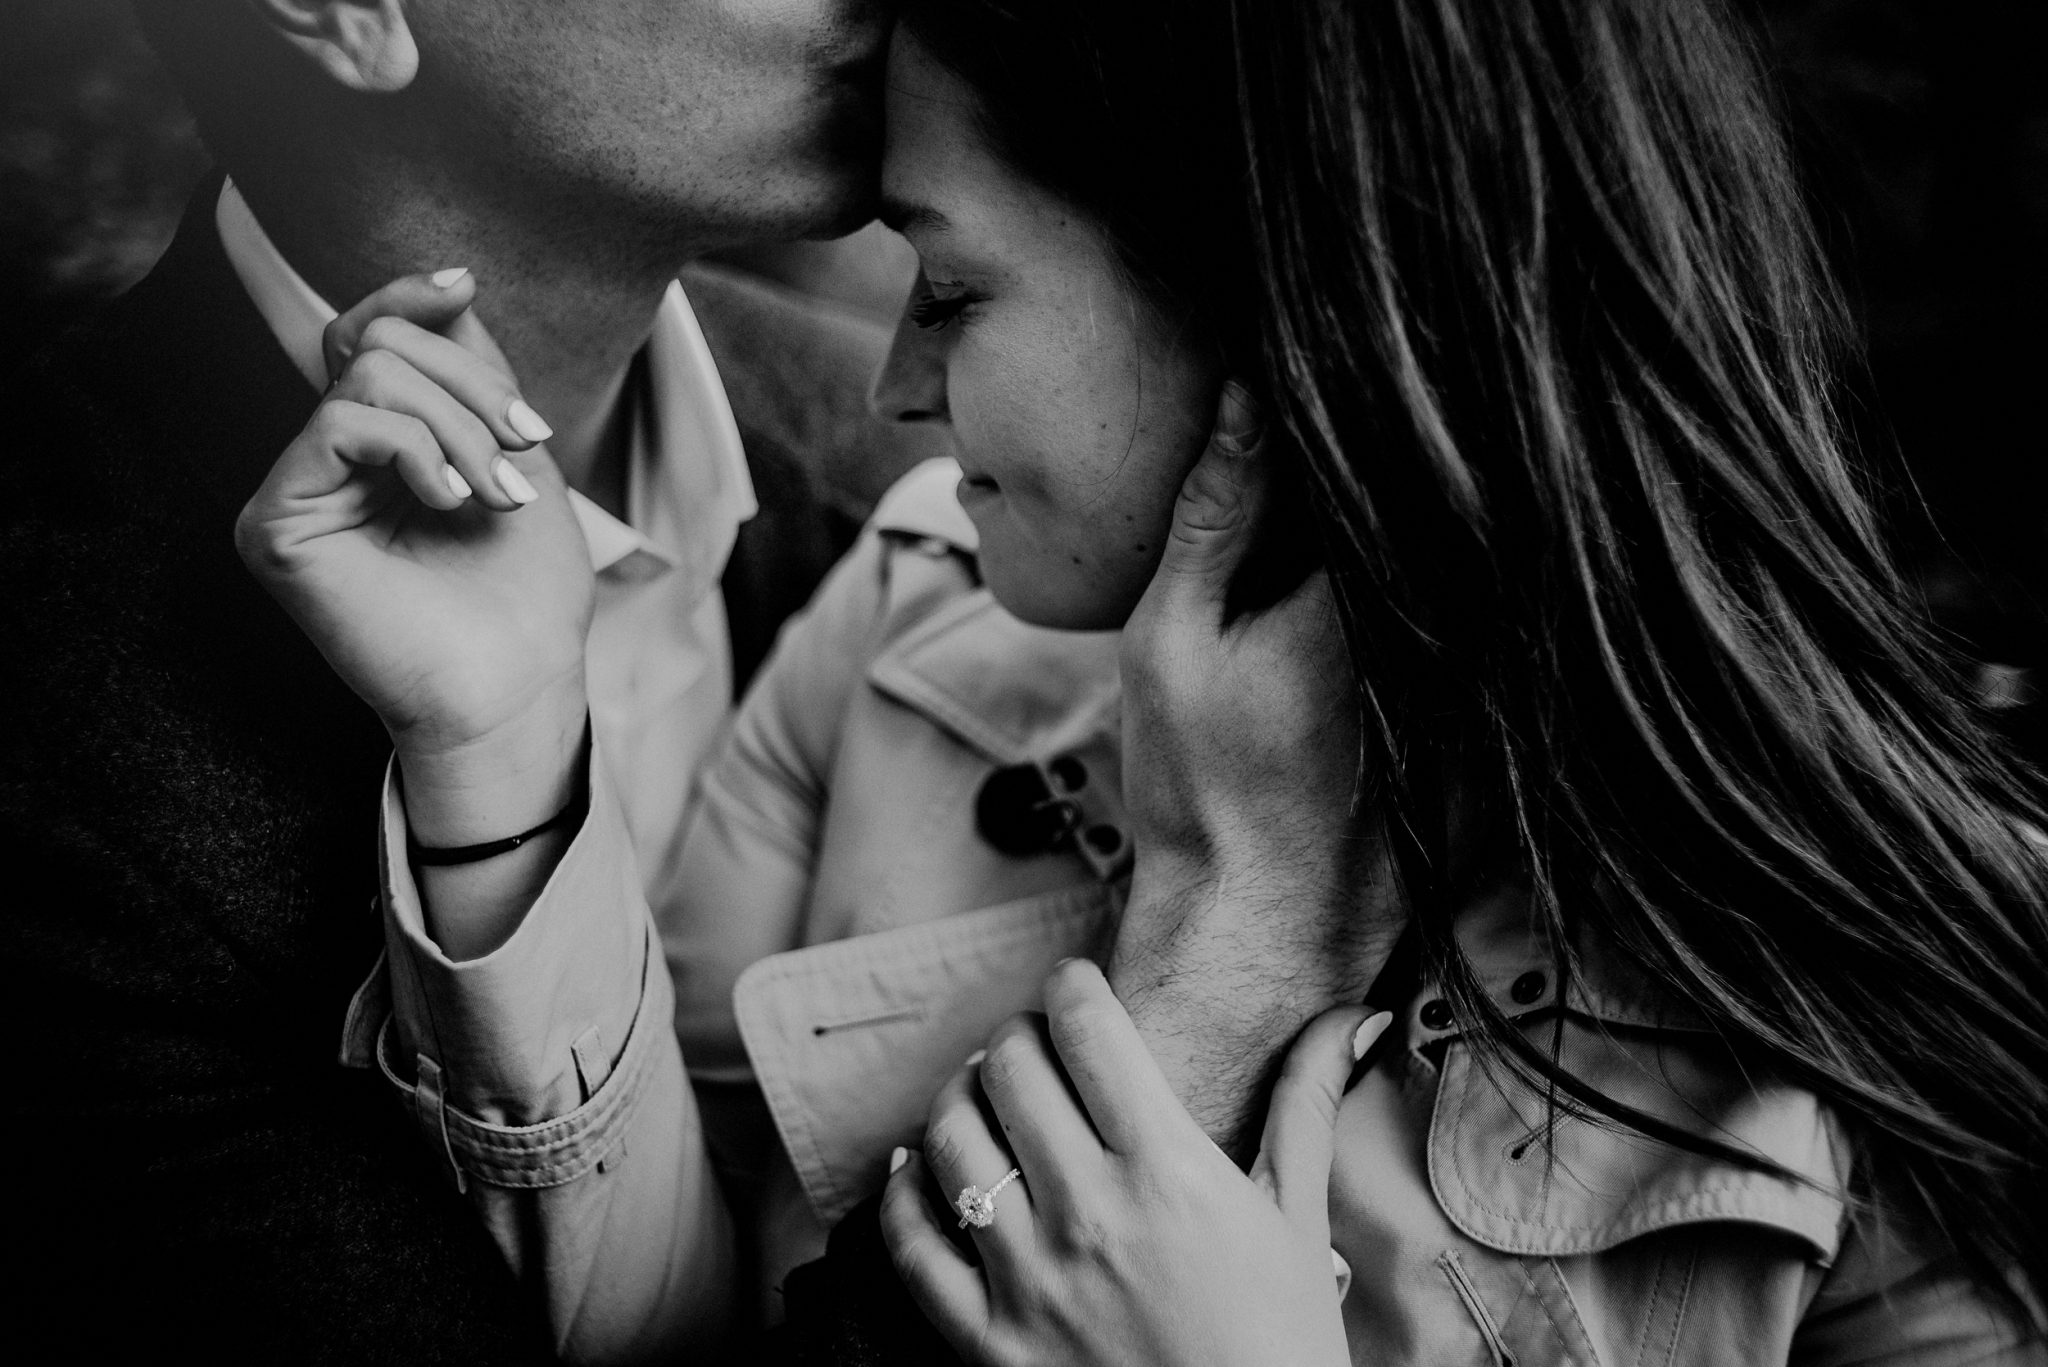 intimate engagement photo in black and white - Surprise engagement proposal